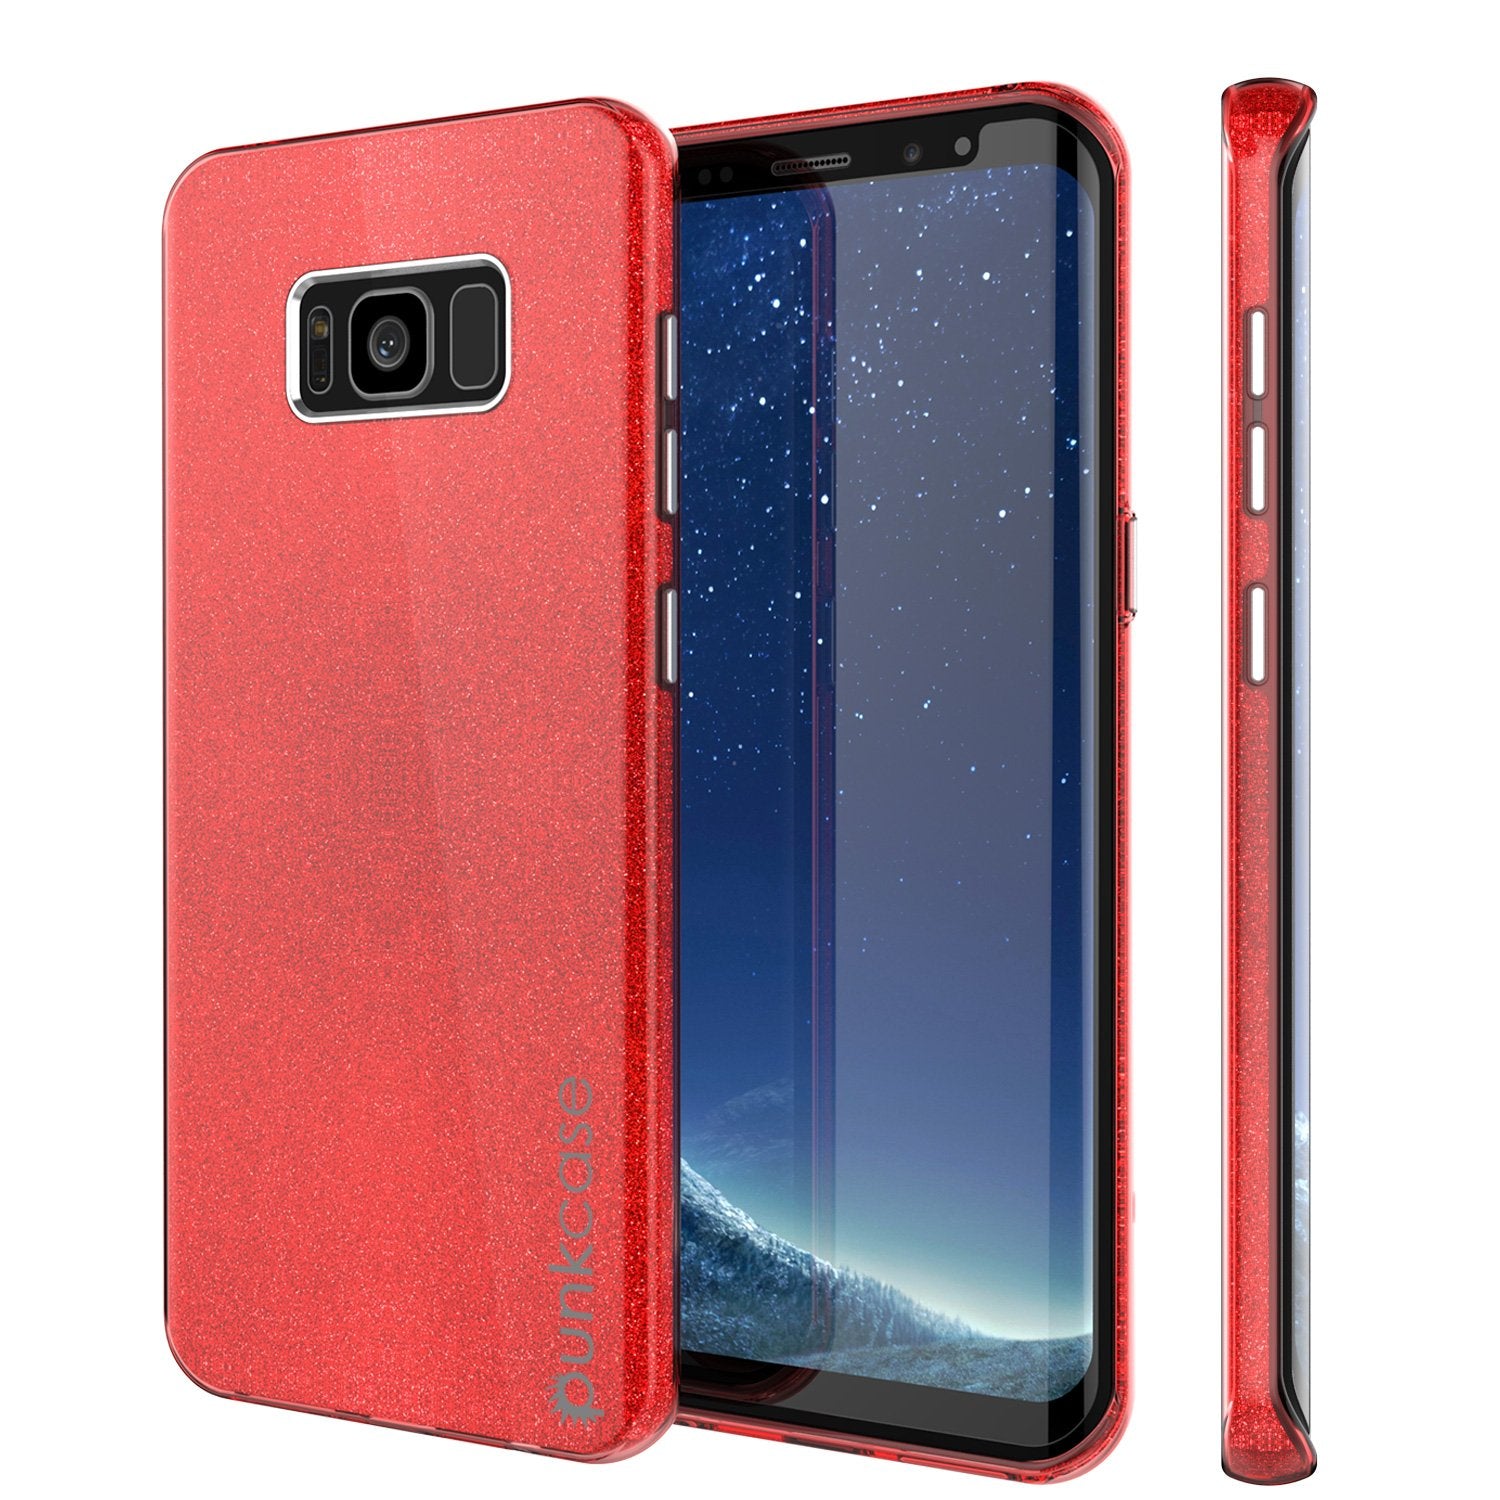 Galaxy S8 Plus Case, Punkcase Galactic 2.0 Series Ultra Slim Protective Armor TPU Cover [Red]